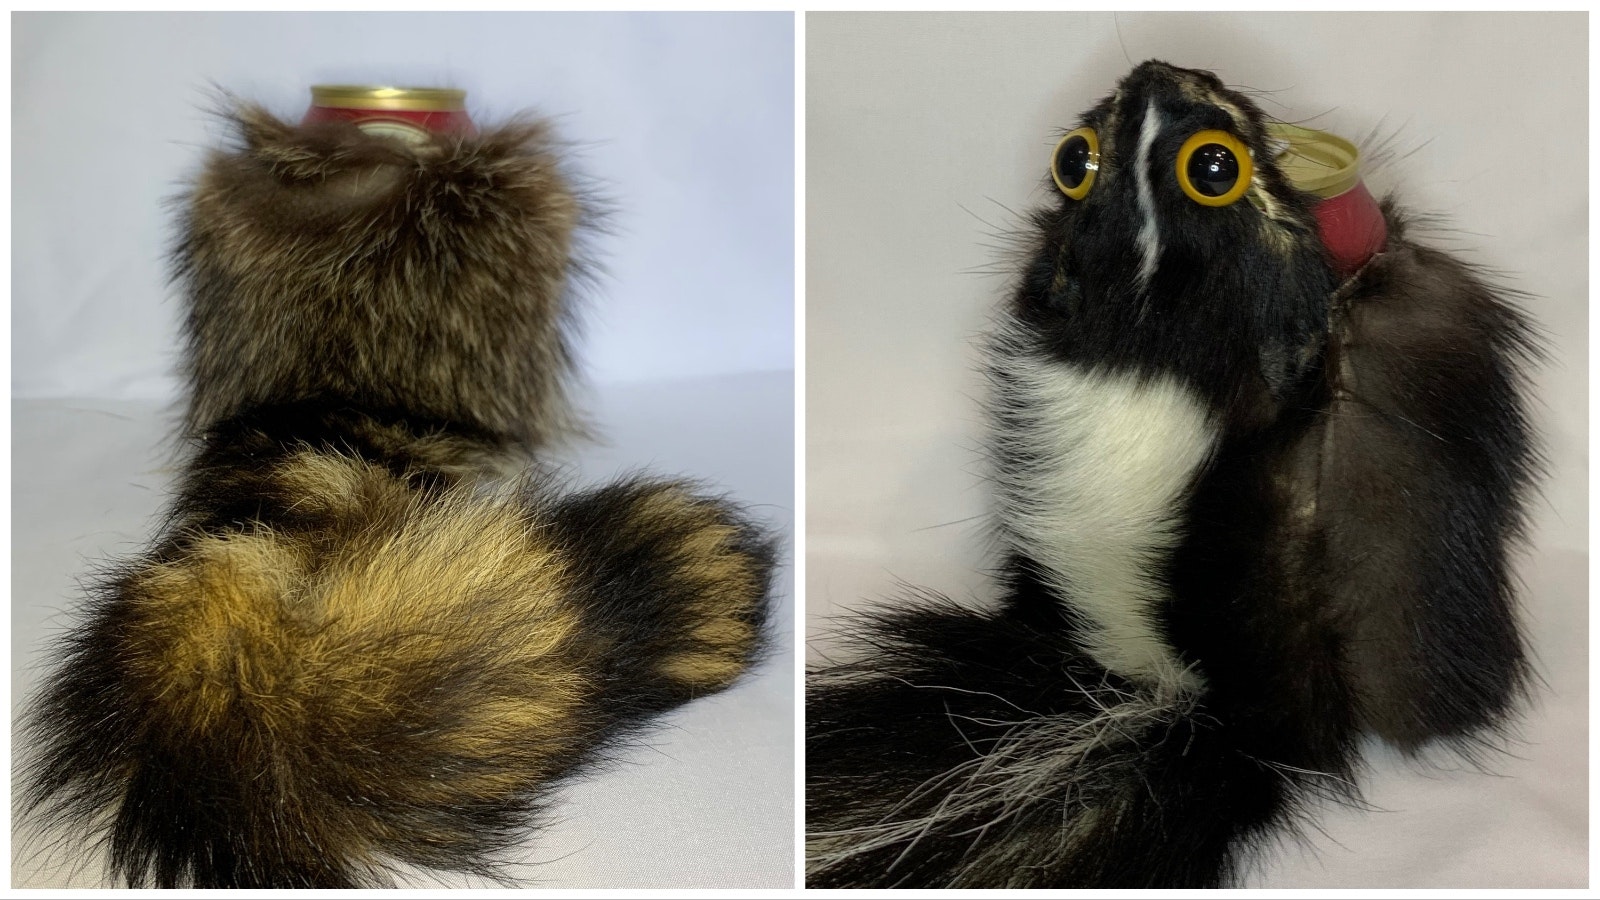 A Racoozie, left, and Skoonzie, koozies made from a raccoon and skunk, respectively.